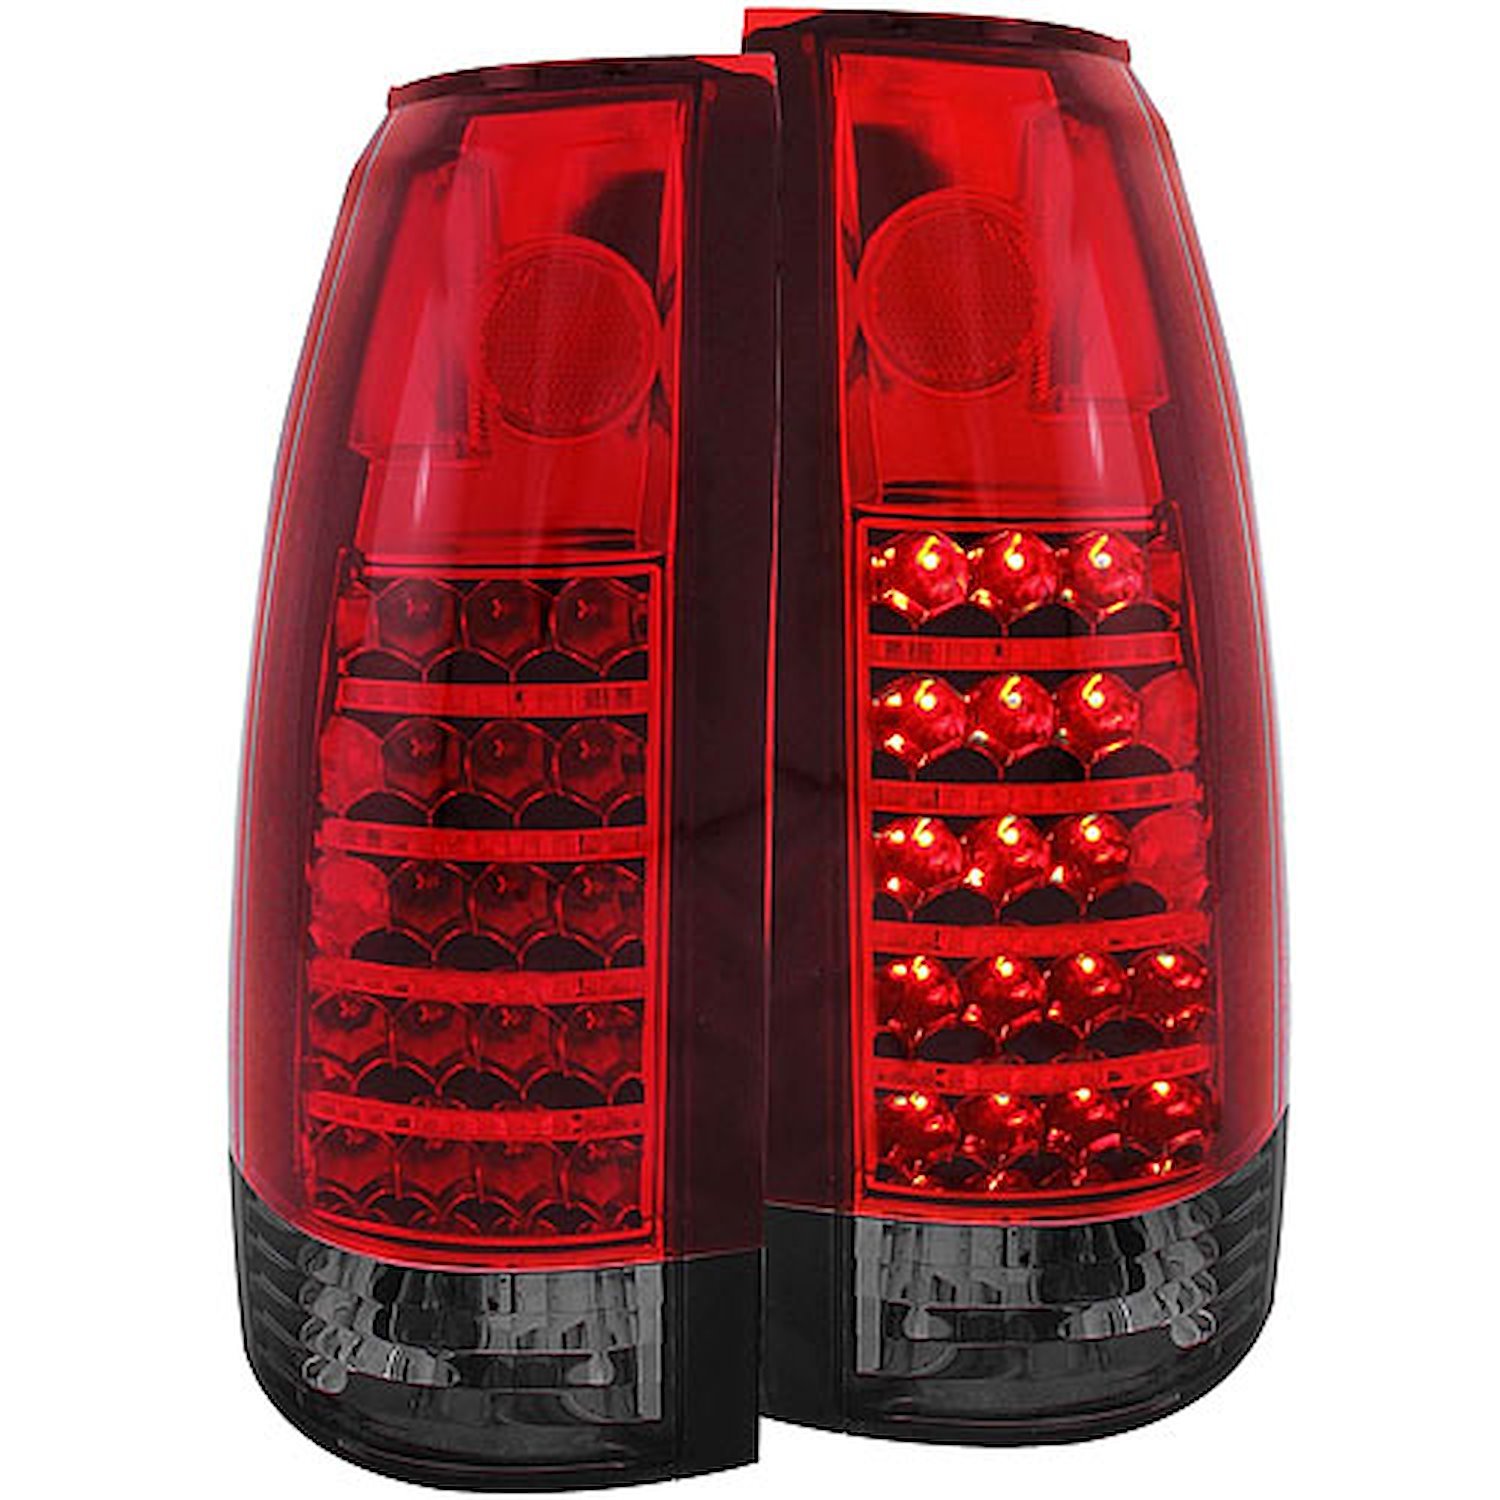 1988-1999 Chevy/GMC Full Size Truck/SUV LED Taillights